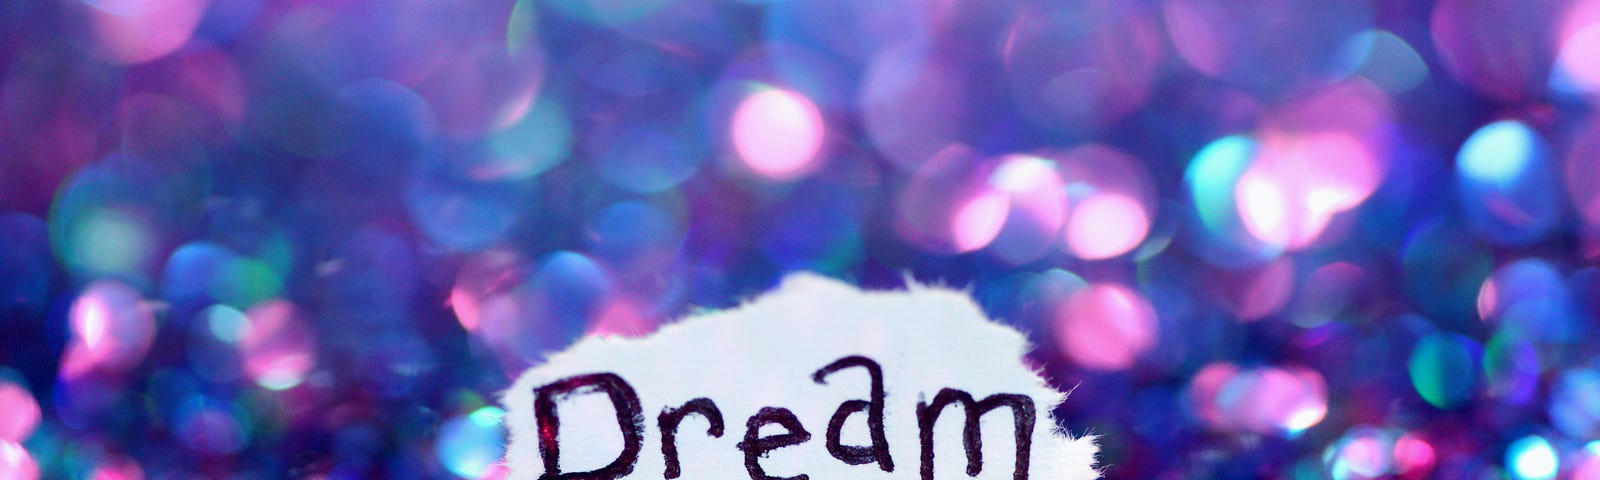 purple and pink sparkles in background with a ripped paper that says “dream” on it.